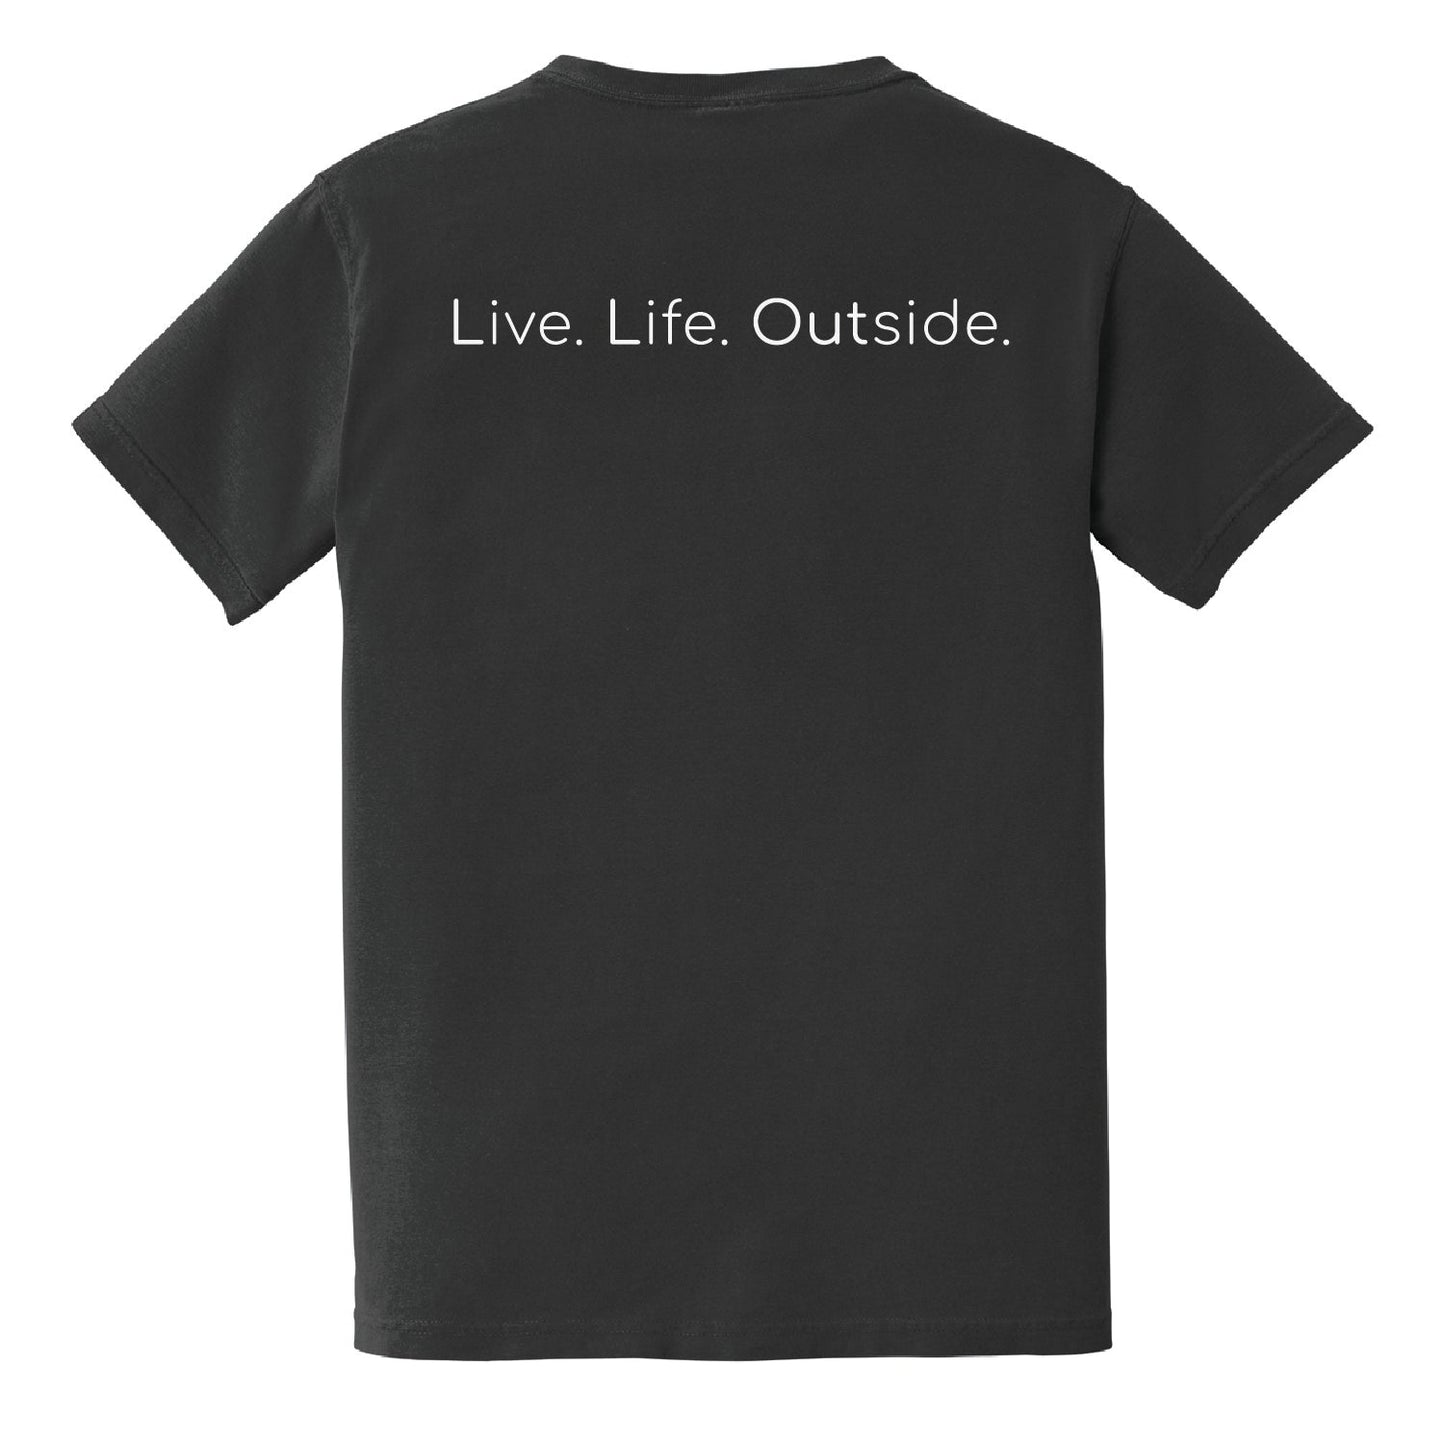 Outlive Heavyweight Ring Spun Pocket Tee - DSP On Demand